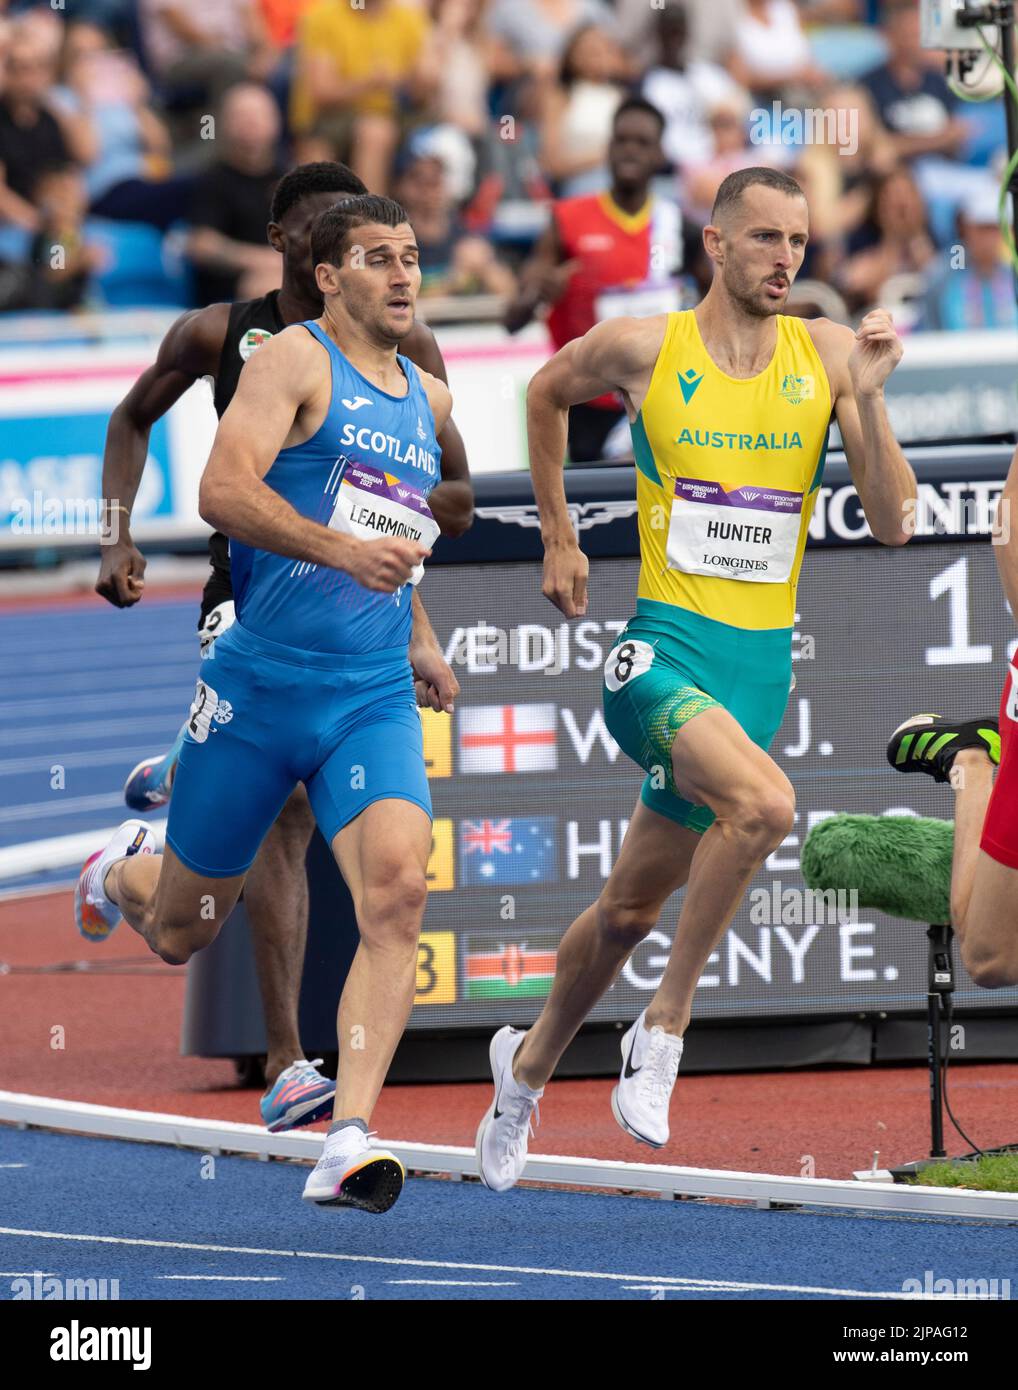 Guy Learmonth of Scotland and Charlie Hunter of Australia competing in the 800m heats at the Commonwealth Games at Alexander Stadium, Birmingham, Engl Stock Photo